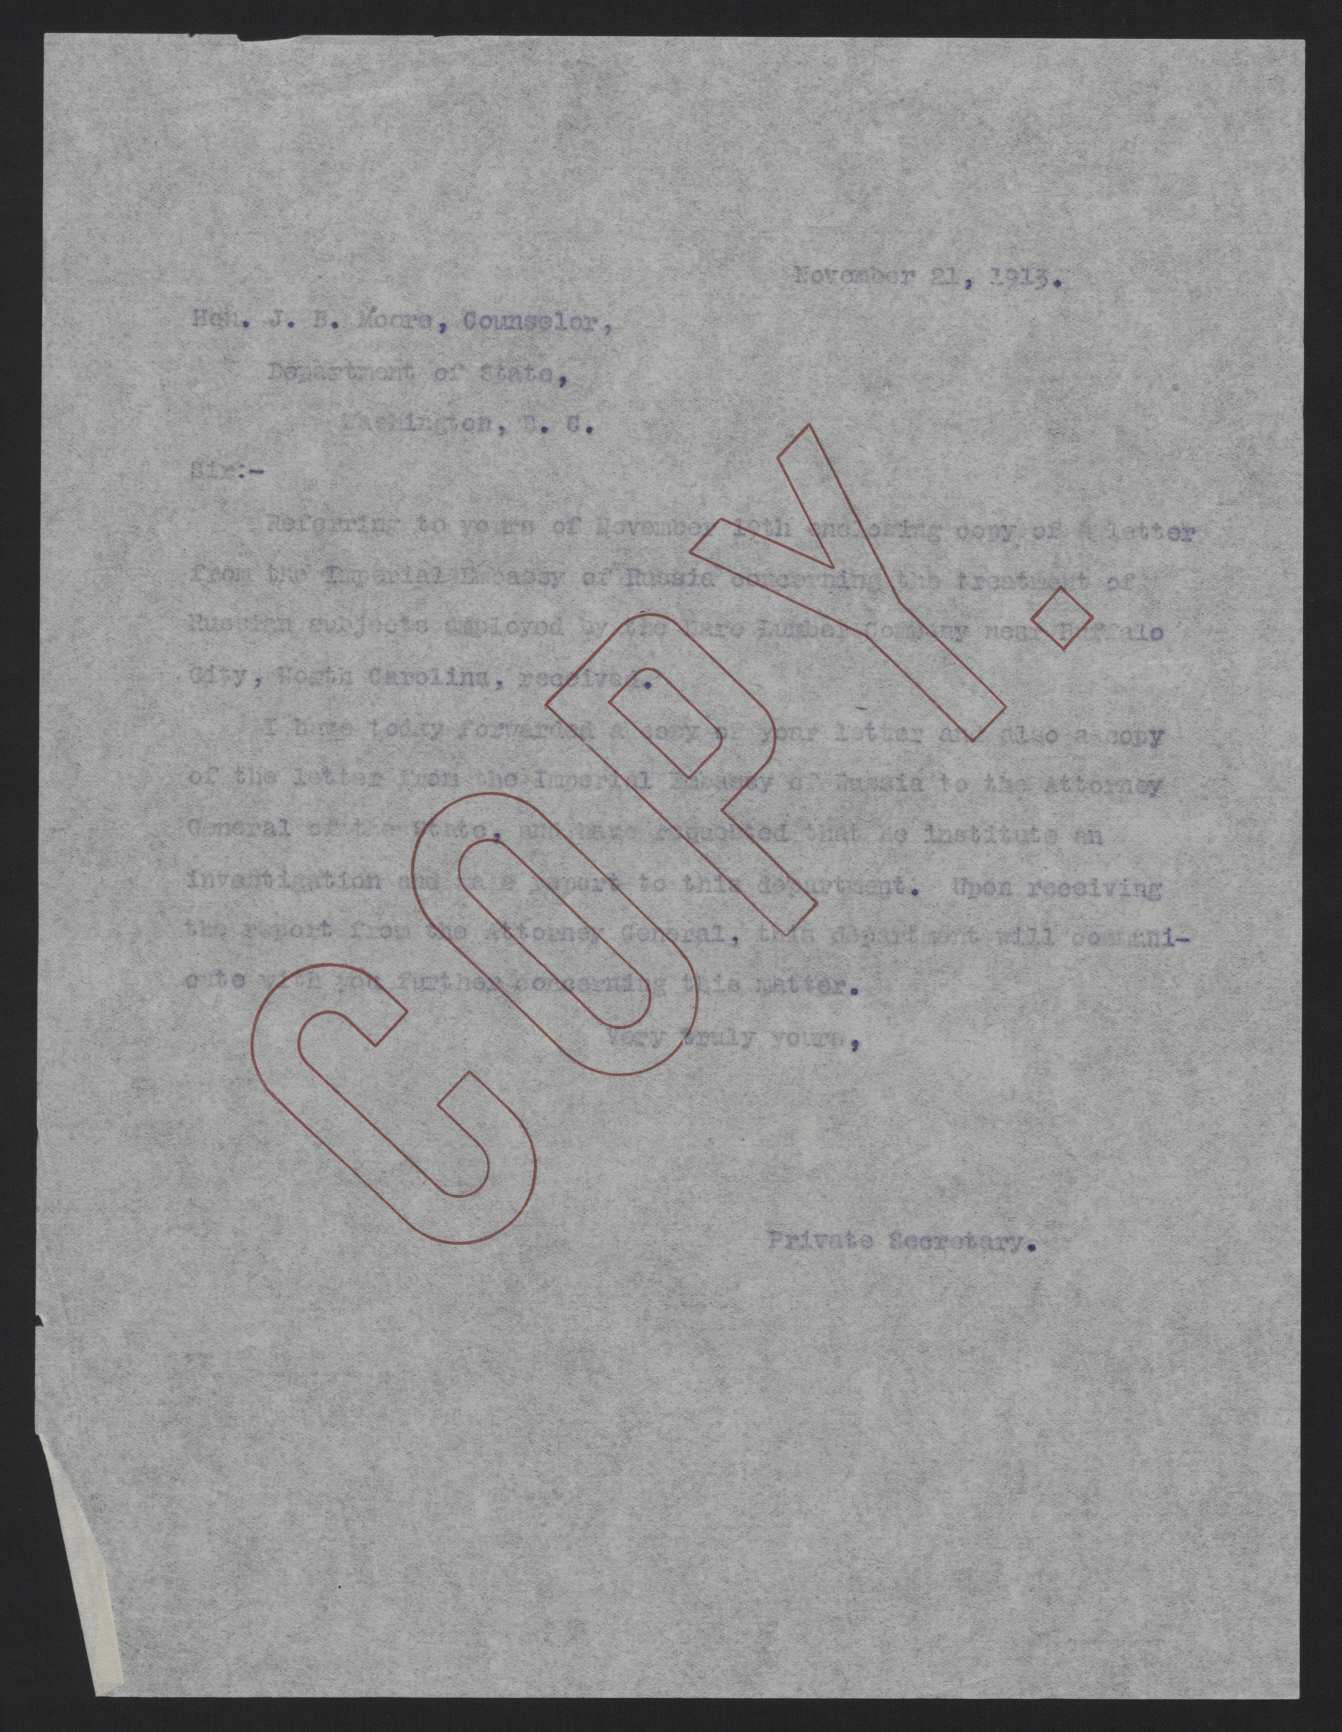 Letter from Kerr to Moore, November 21, 1913